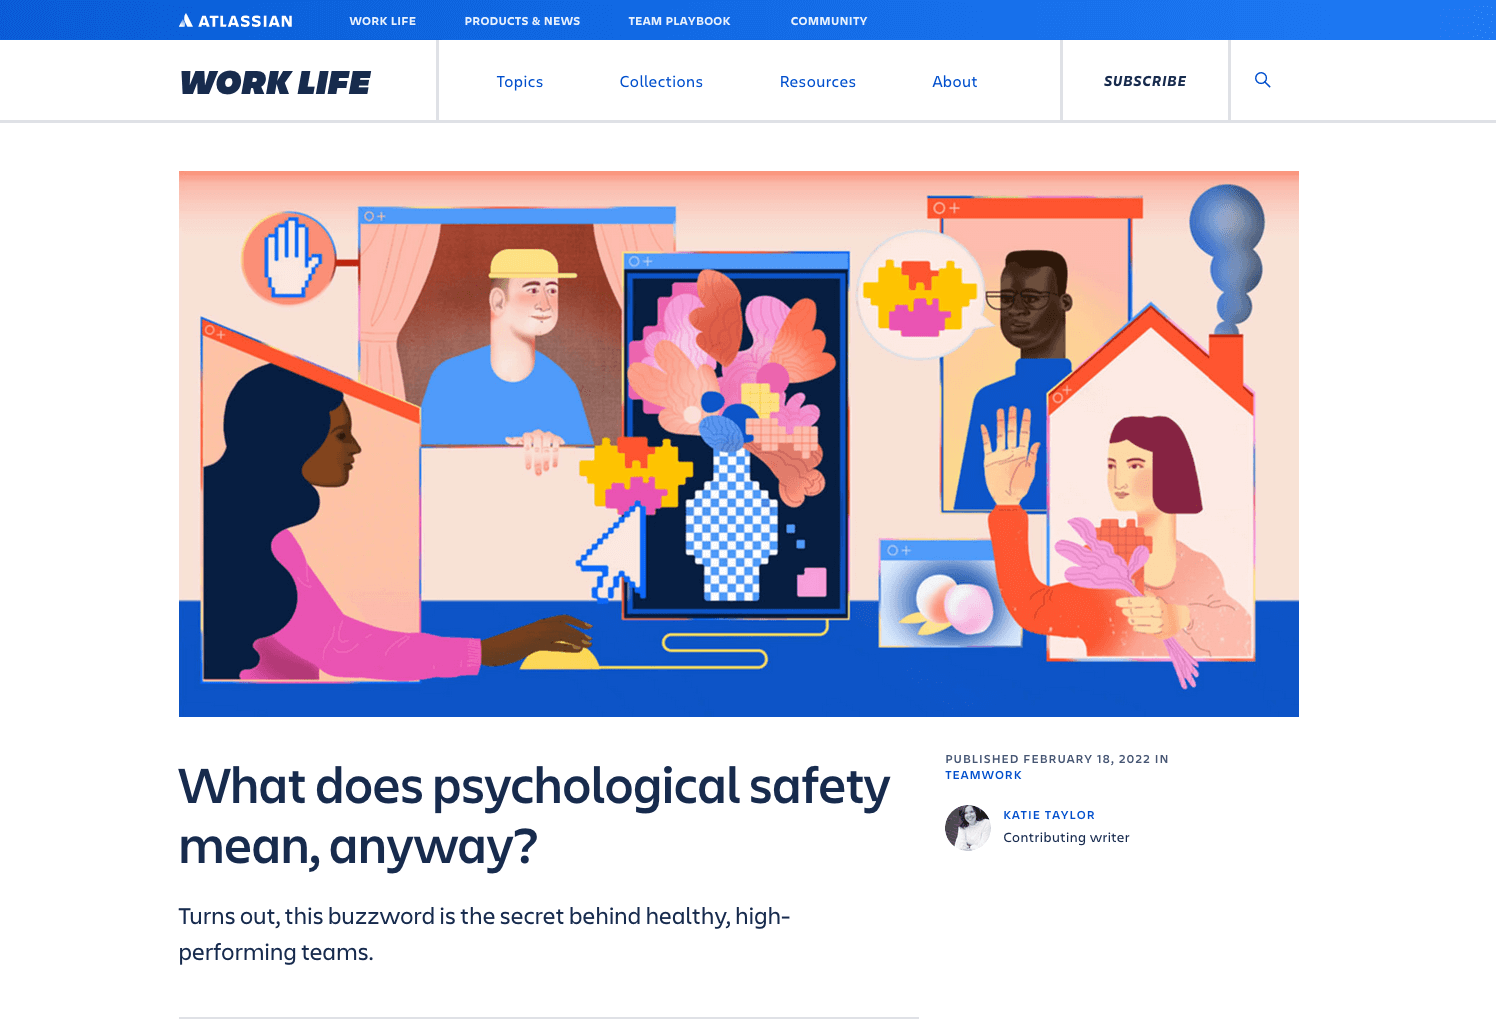 screenshot of the Work Life Atlassian blog with an illustration about psychological safety by isabel albertos